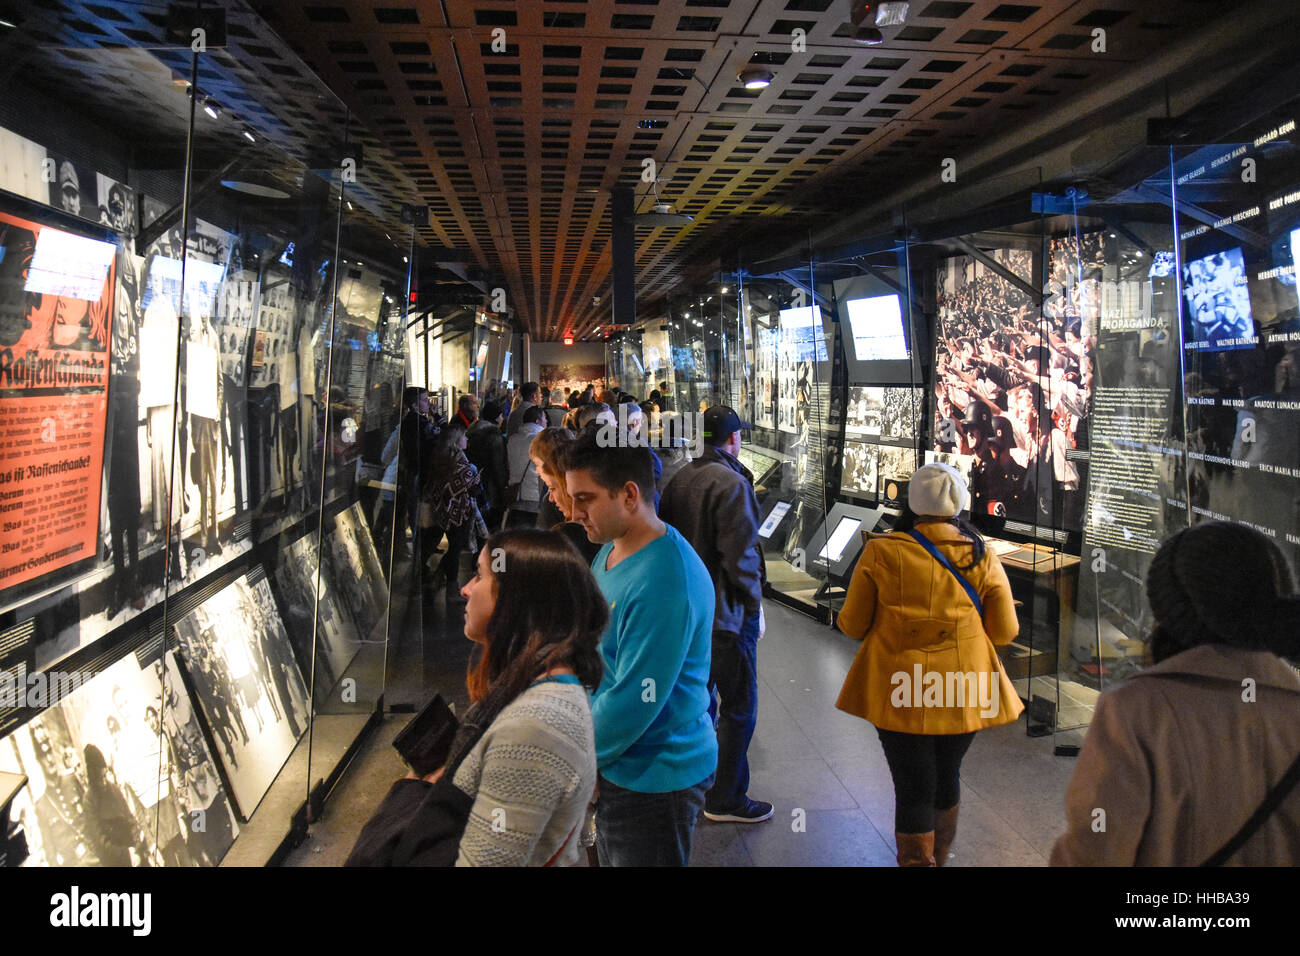 Washington DC, - Internal view of the Holocaust Memorial Museum. Real pictures of the deported, Nazi propaganda, crematorium. Stock Photo